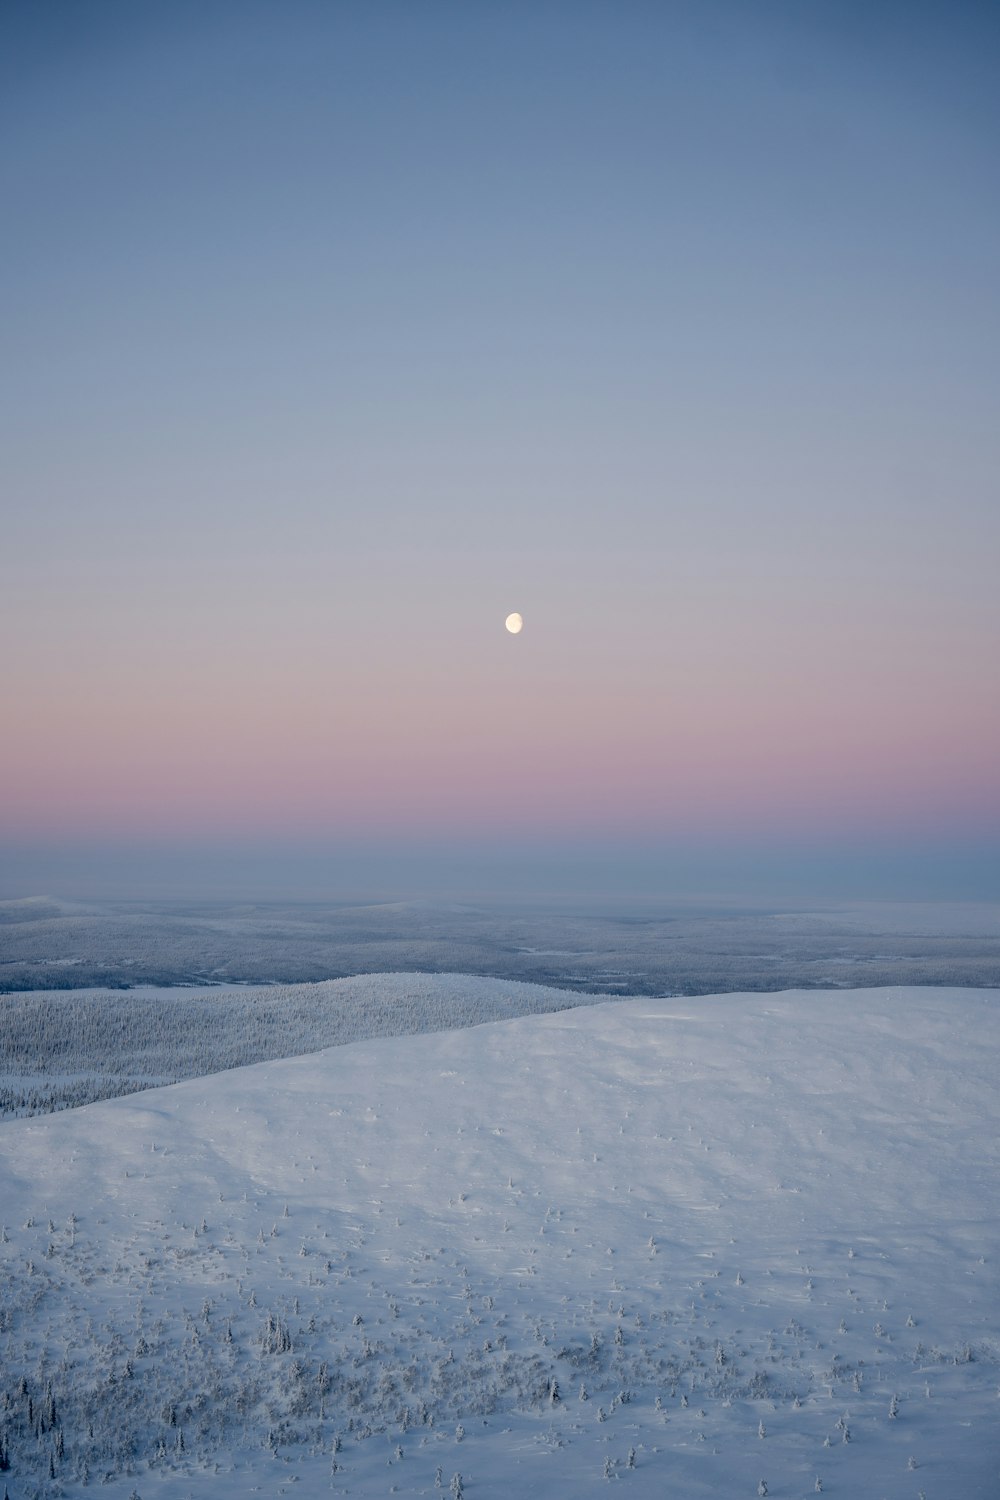 a full moon is seen over a snowy landscape